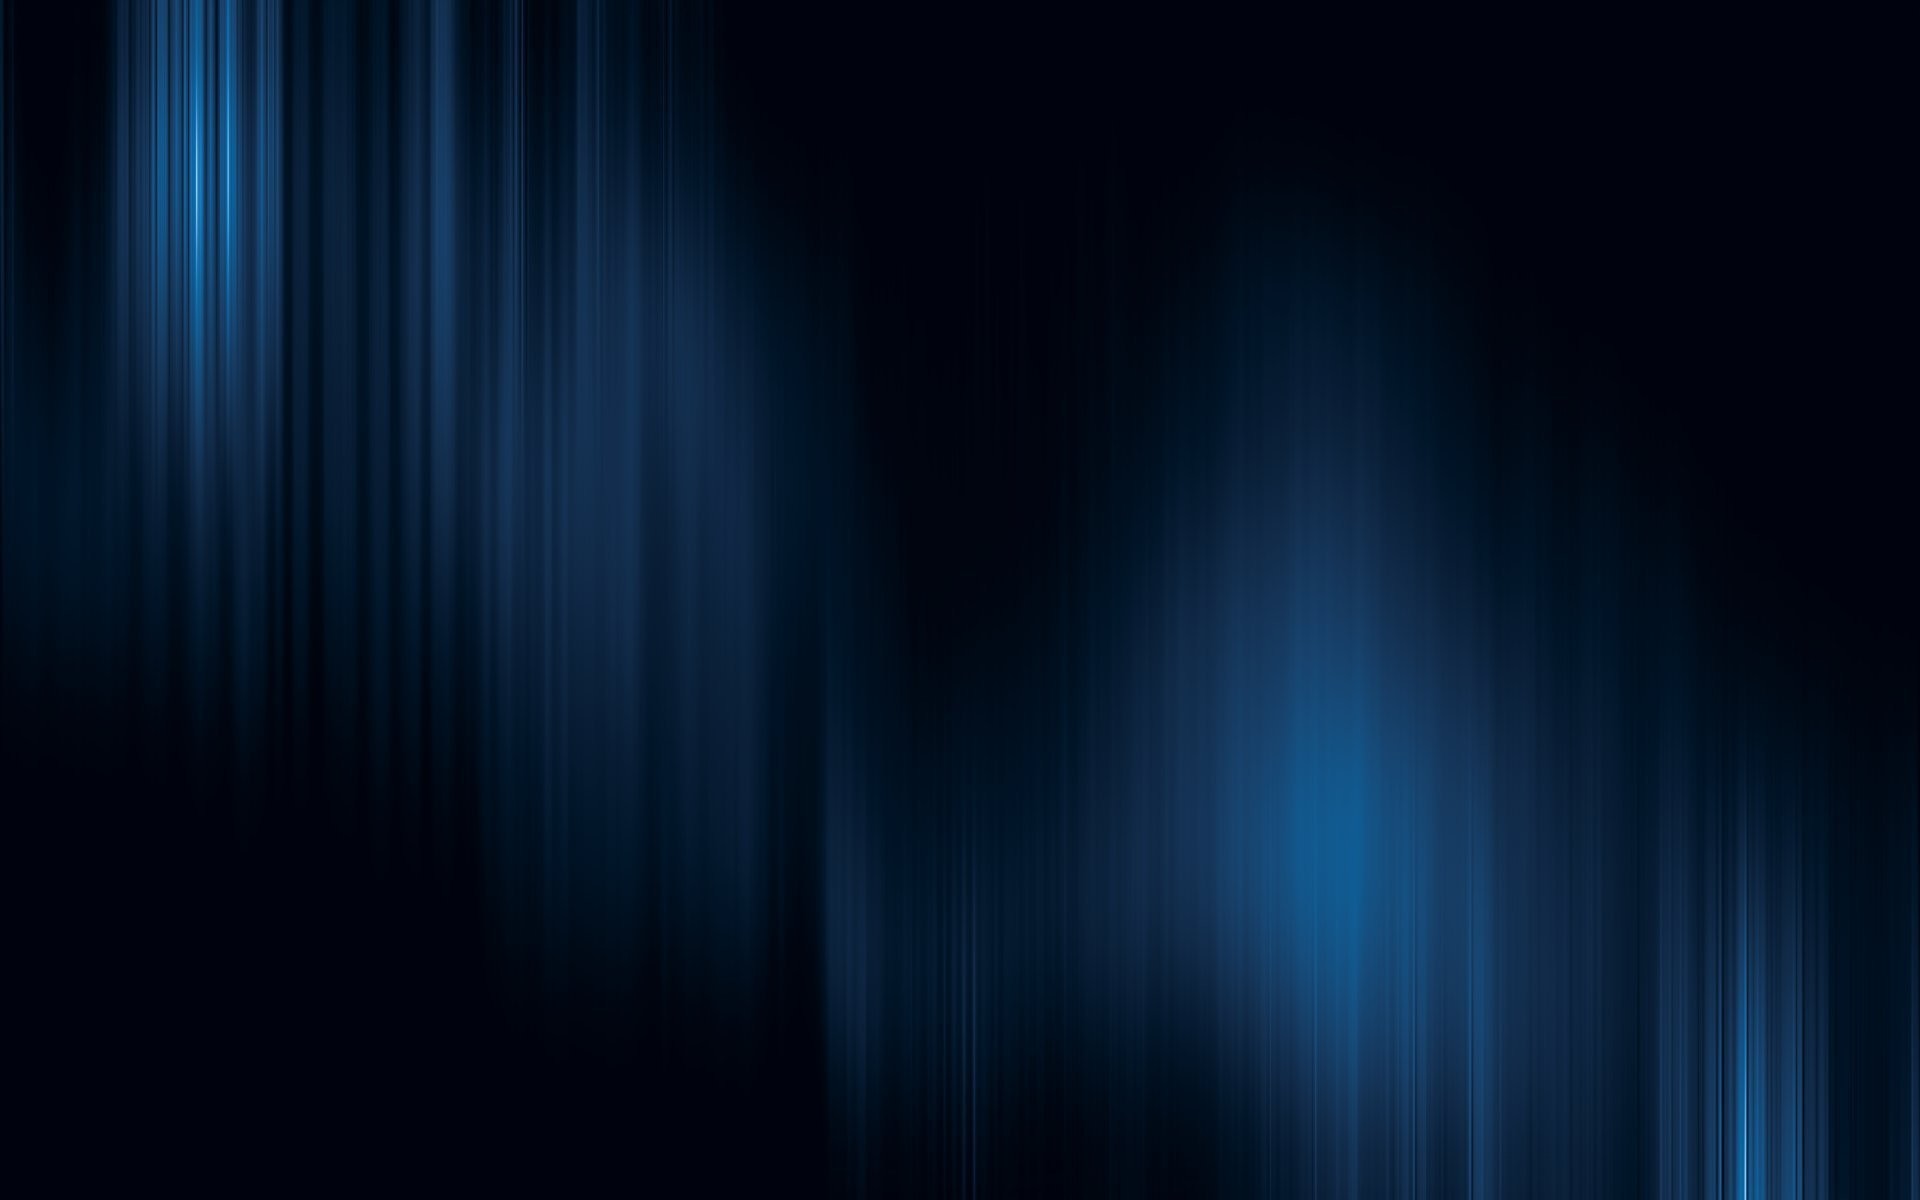 1920x1200 Black and Blue Wallpaper Free Download.